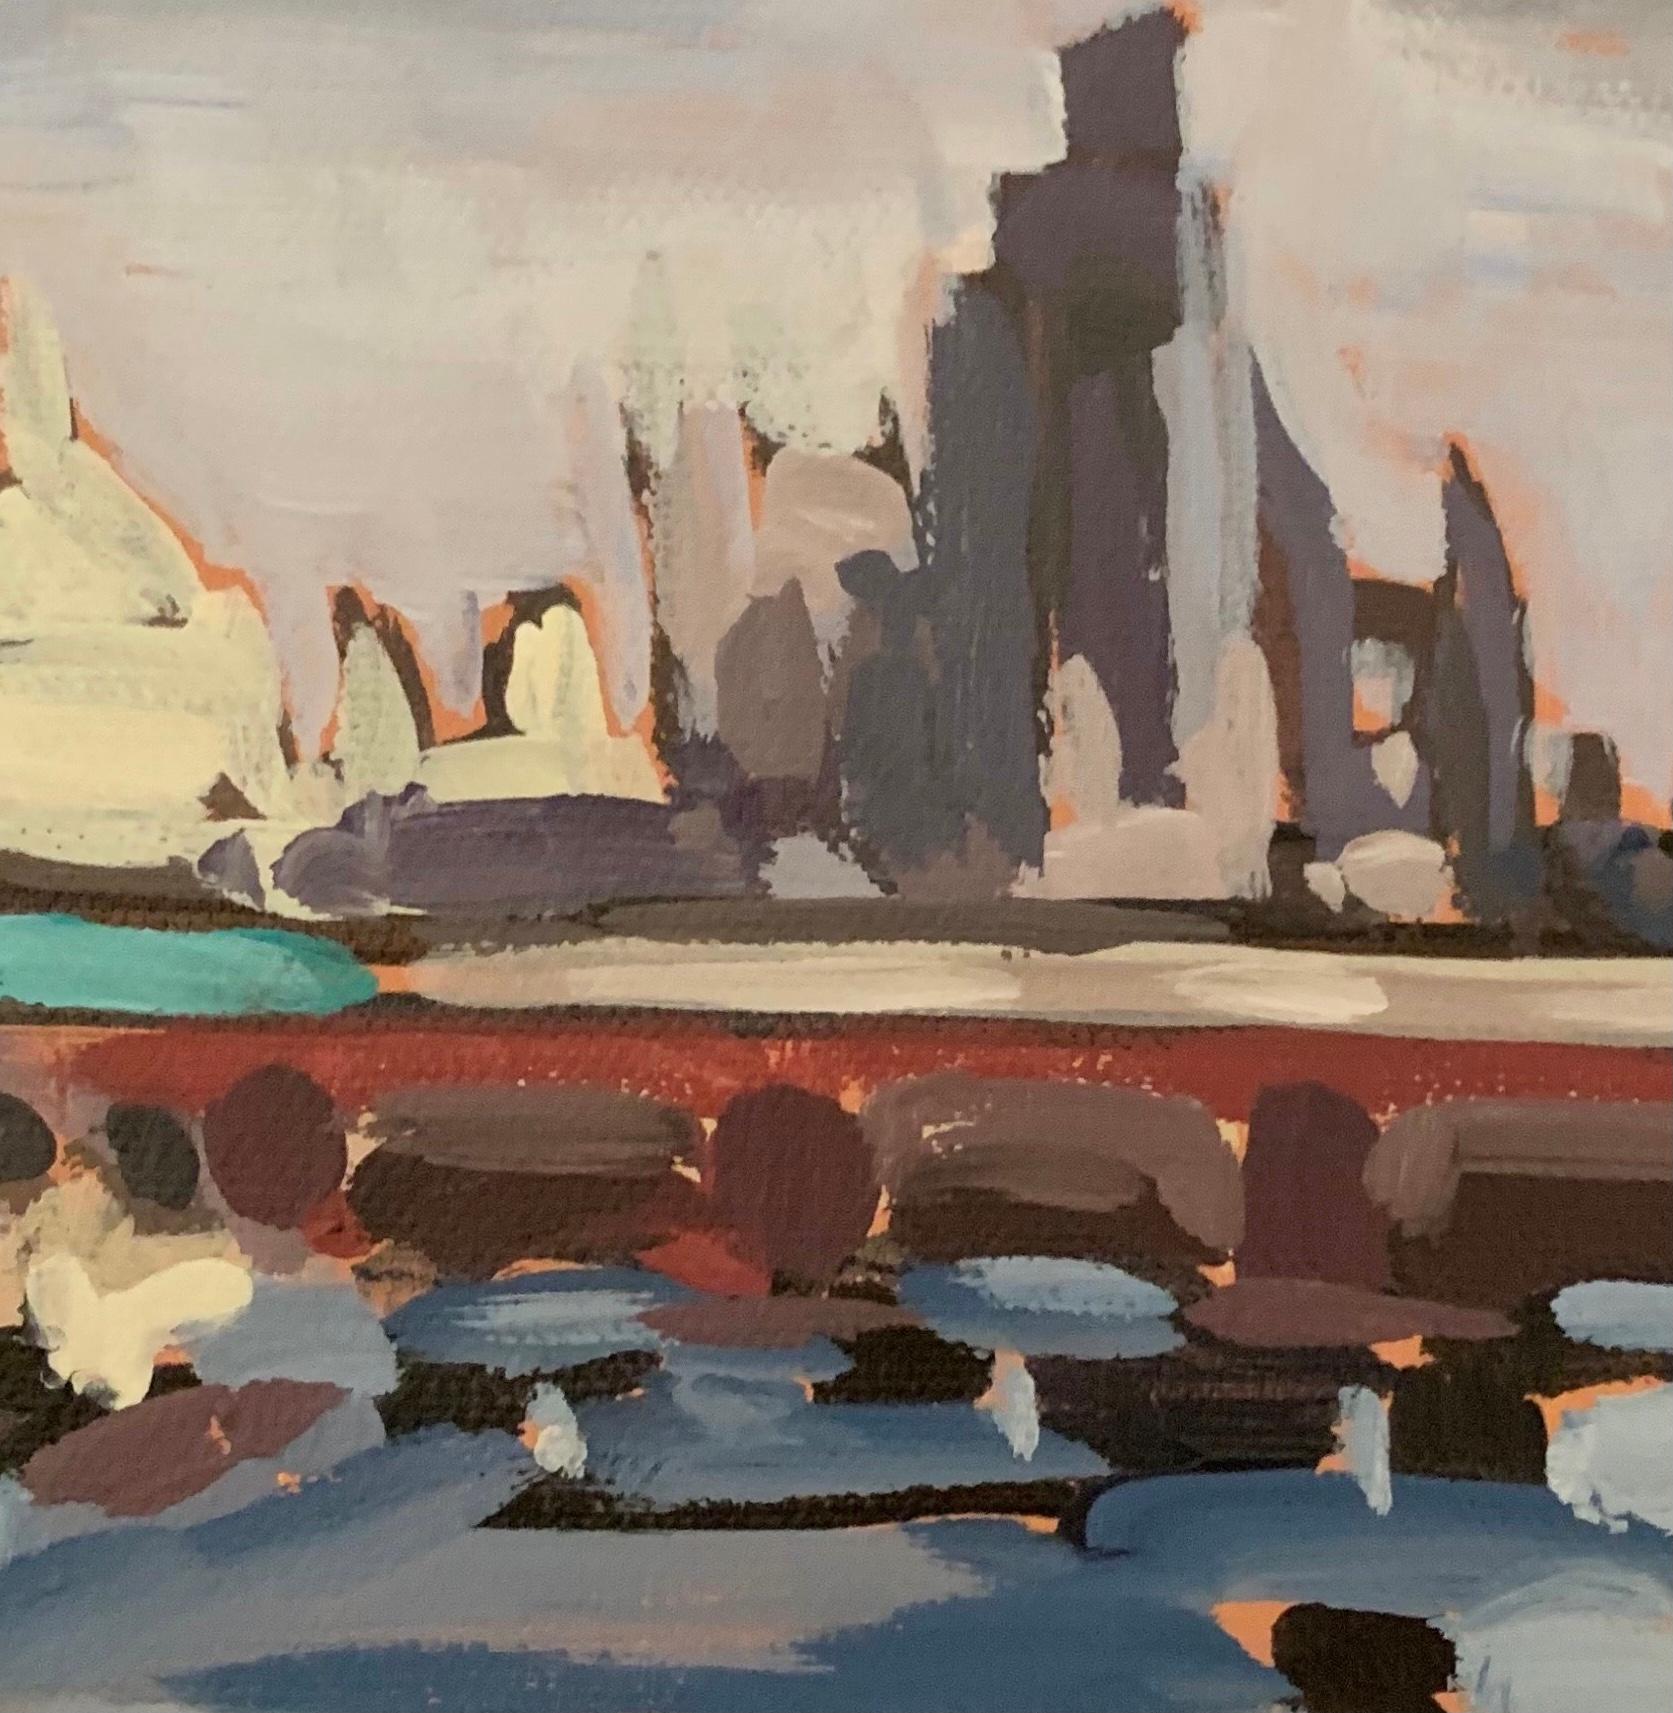 The London city skyline in Autumn from the Thames Path when the tide is out

Acrylic paint on Canvas
20 H x 20 W x 2 D cm (7.87 x 7.87 x 0.79 in)
Sold unframed

Image size: 
Height: 20cm (7.87 in) 
Width: 20cm (7.87 in)

Complete size of unframed